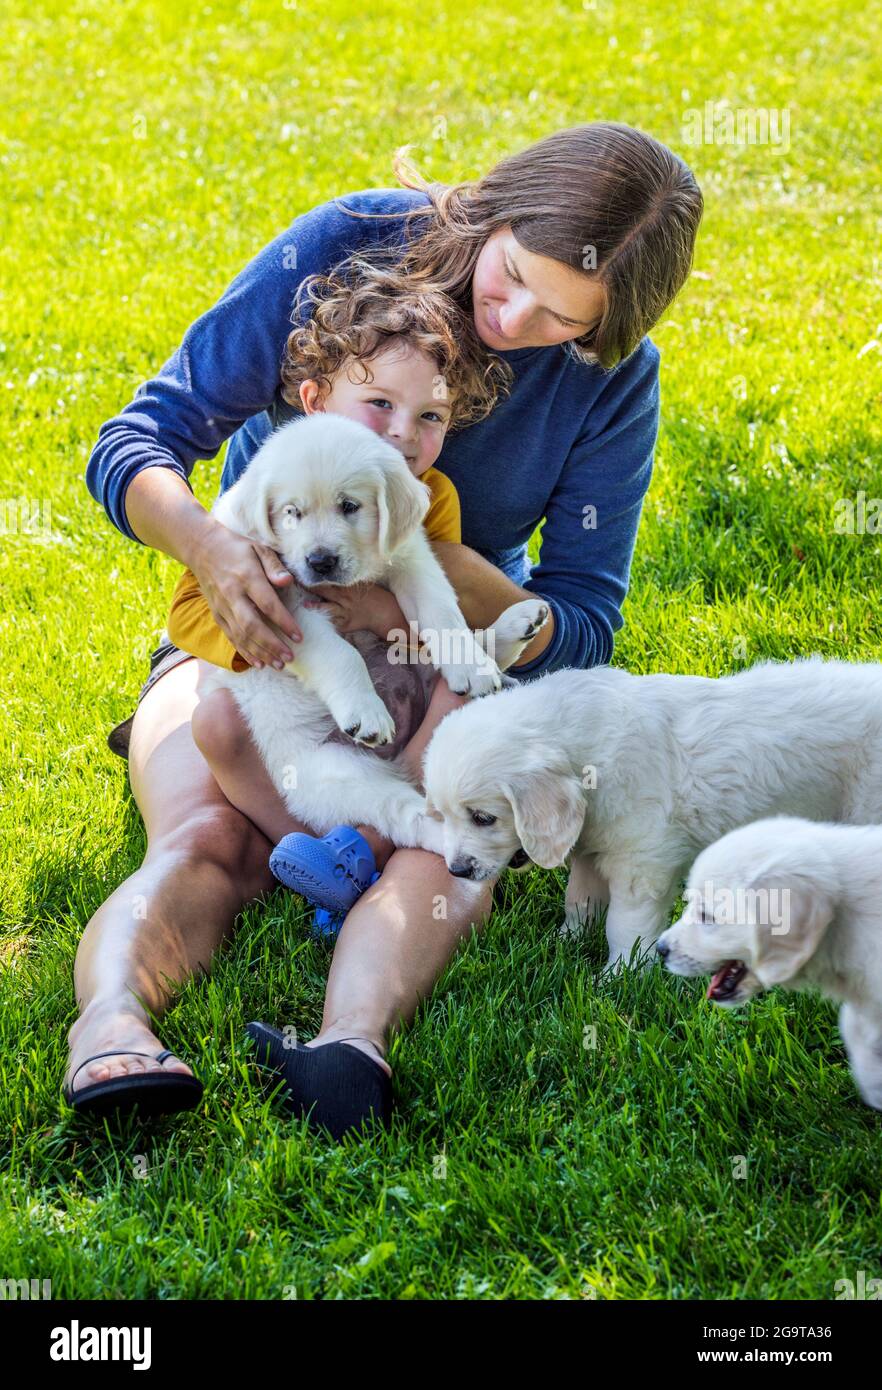 Mother and young daughter playing on grass with six week old Platinum, or Cream colored Golden Retriever puppies. Stock Photo